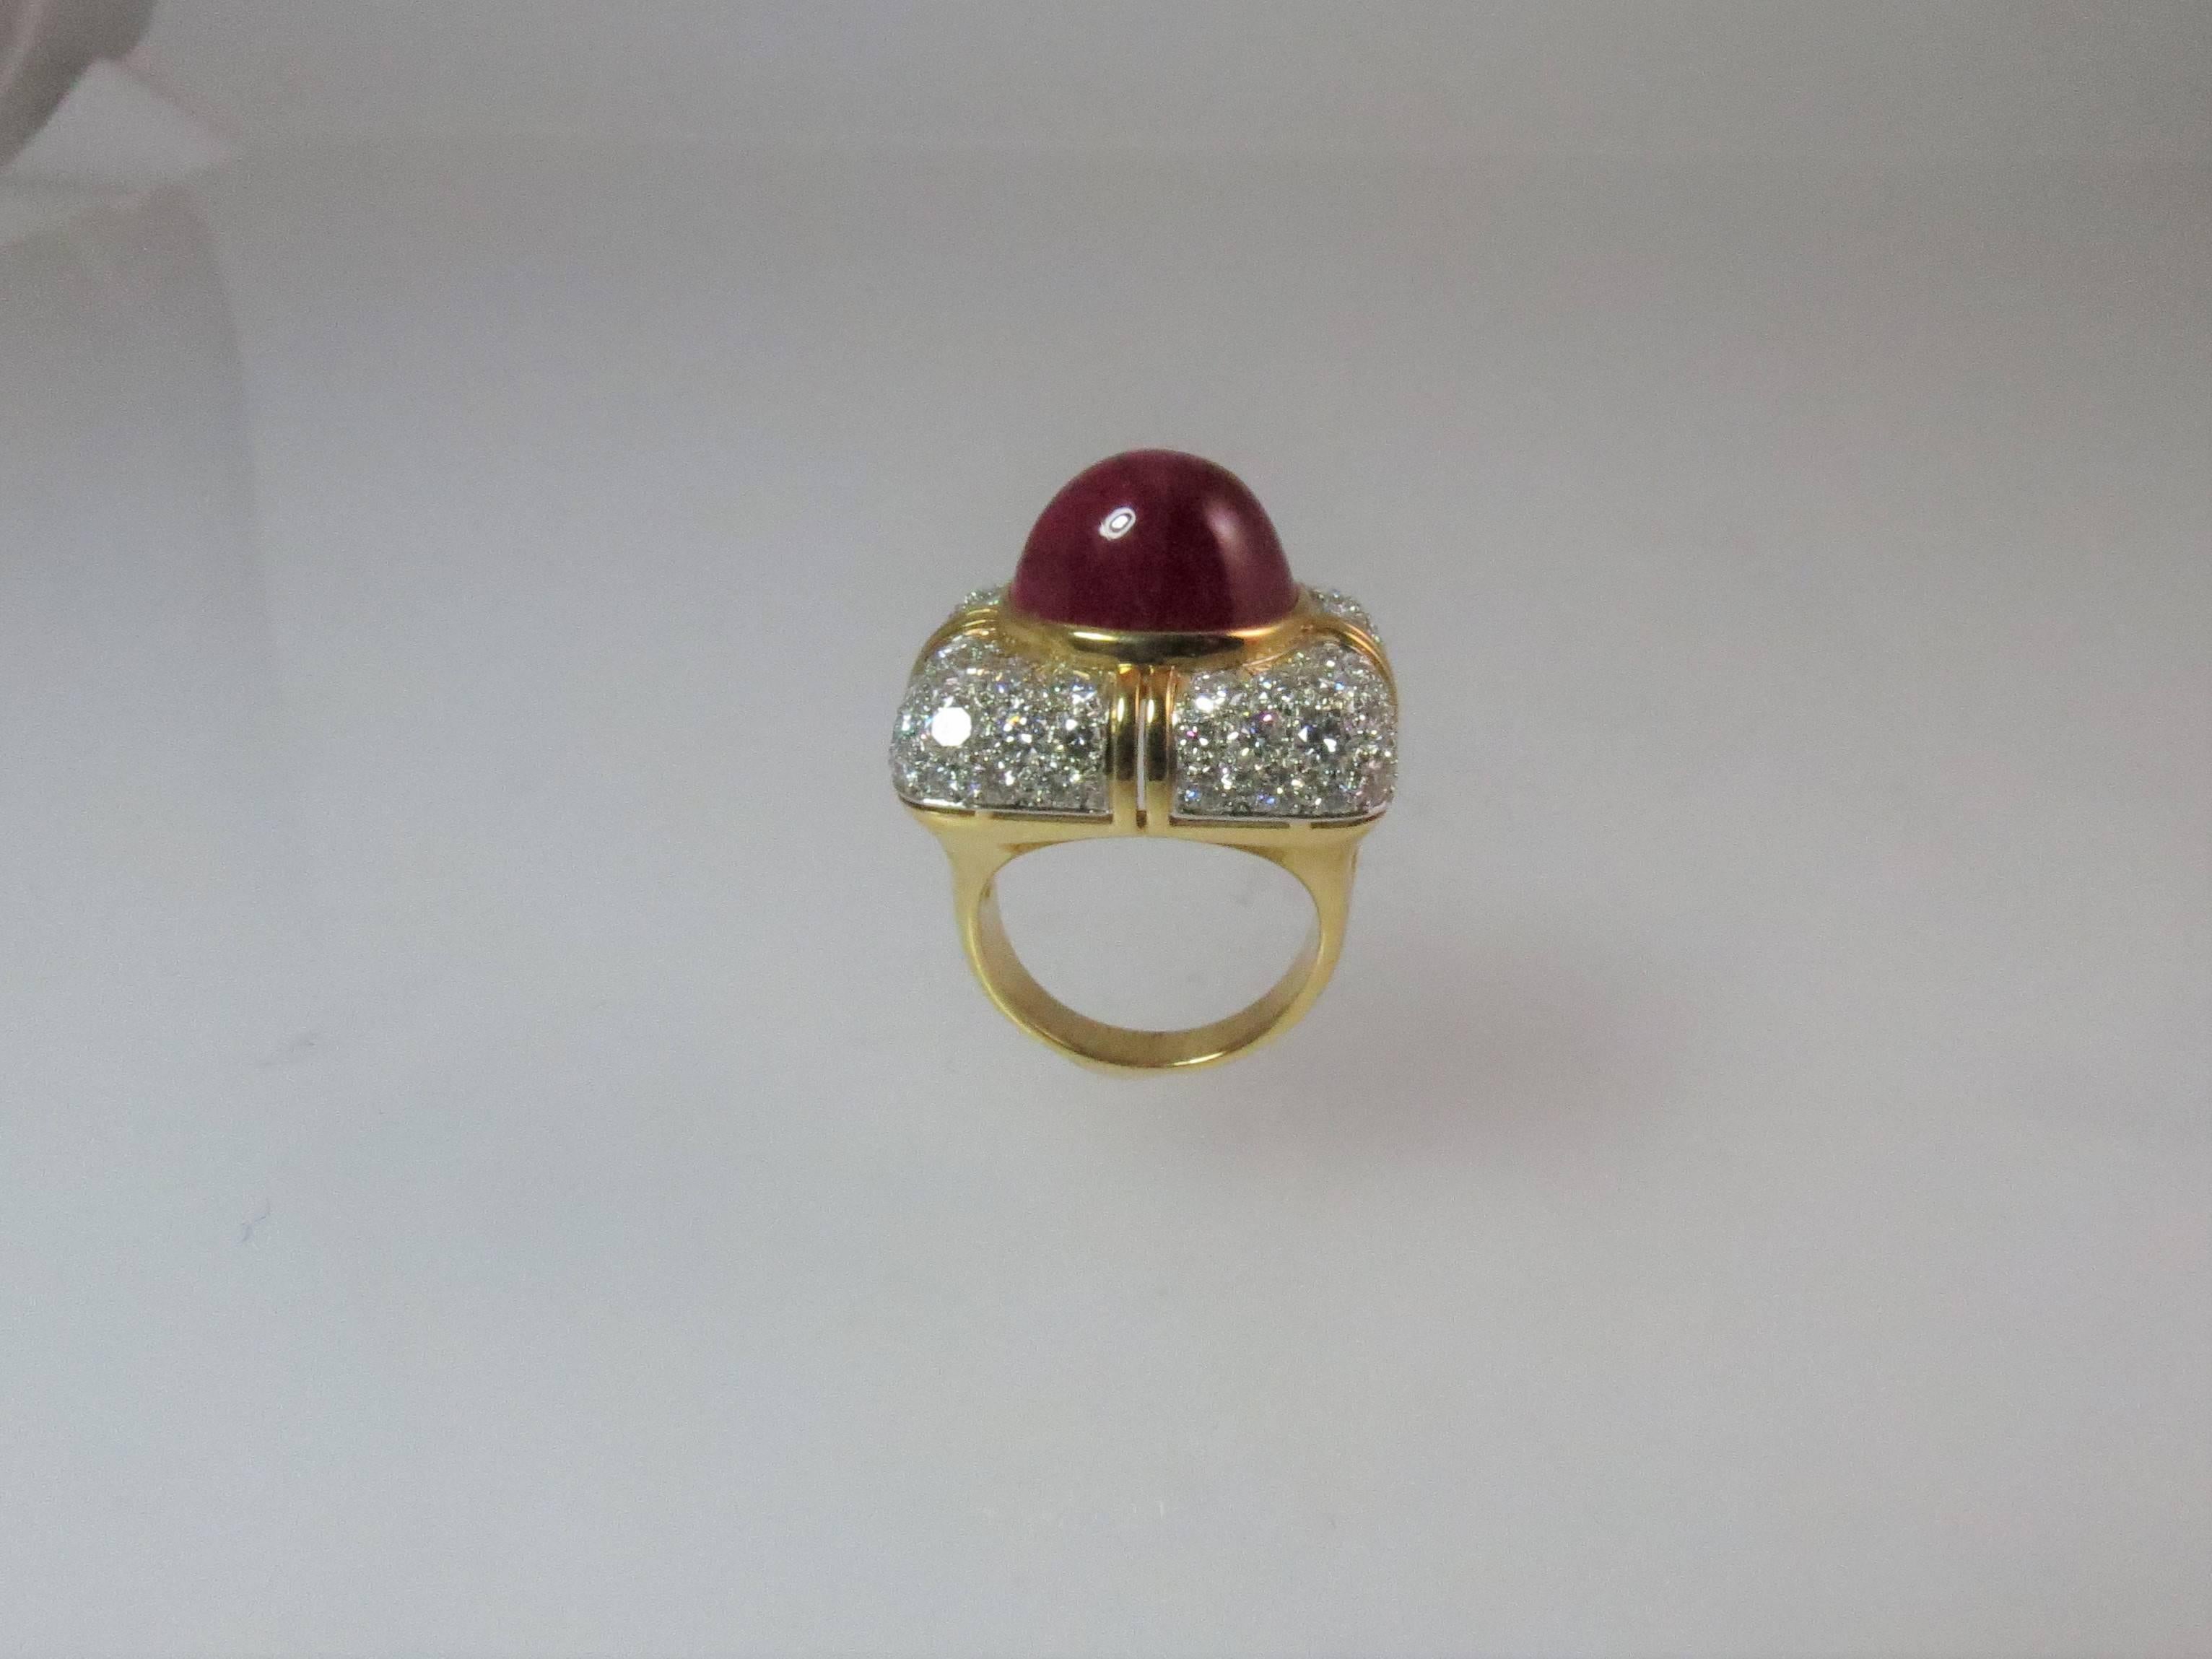 Montreaux, 18K yellow gold and platinum ring, set with one cabochon ruby weighing 15.80 carats, measuring 13.60mm x 11.95mm and 72 full cut round diamonds weighing 3.66cts, D-E color, VVS.
Finger size 6.25, may be sized 